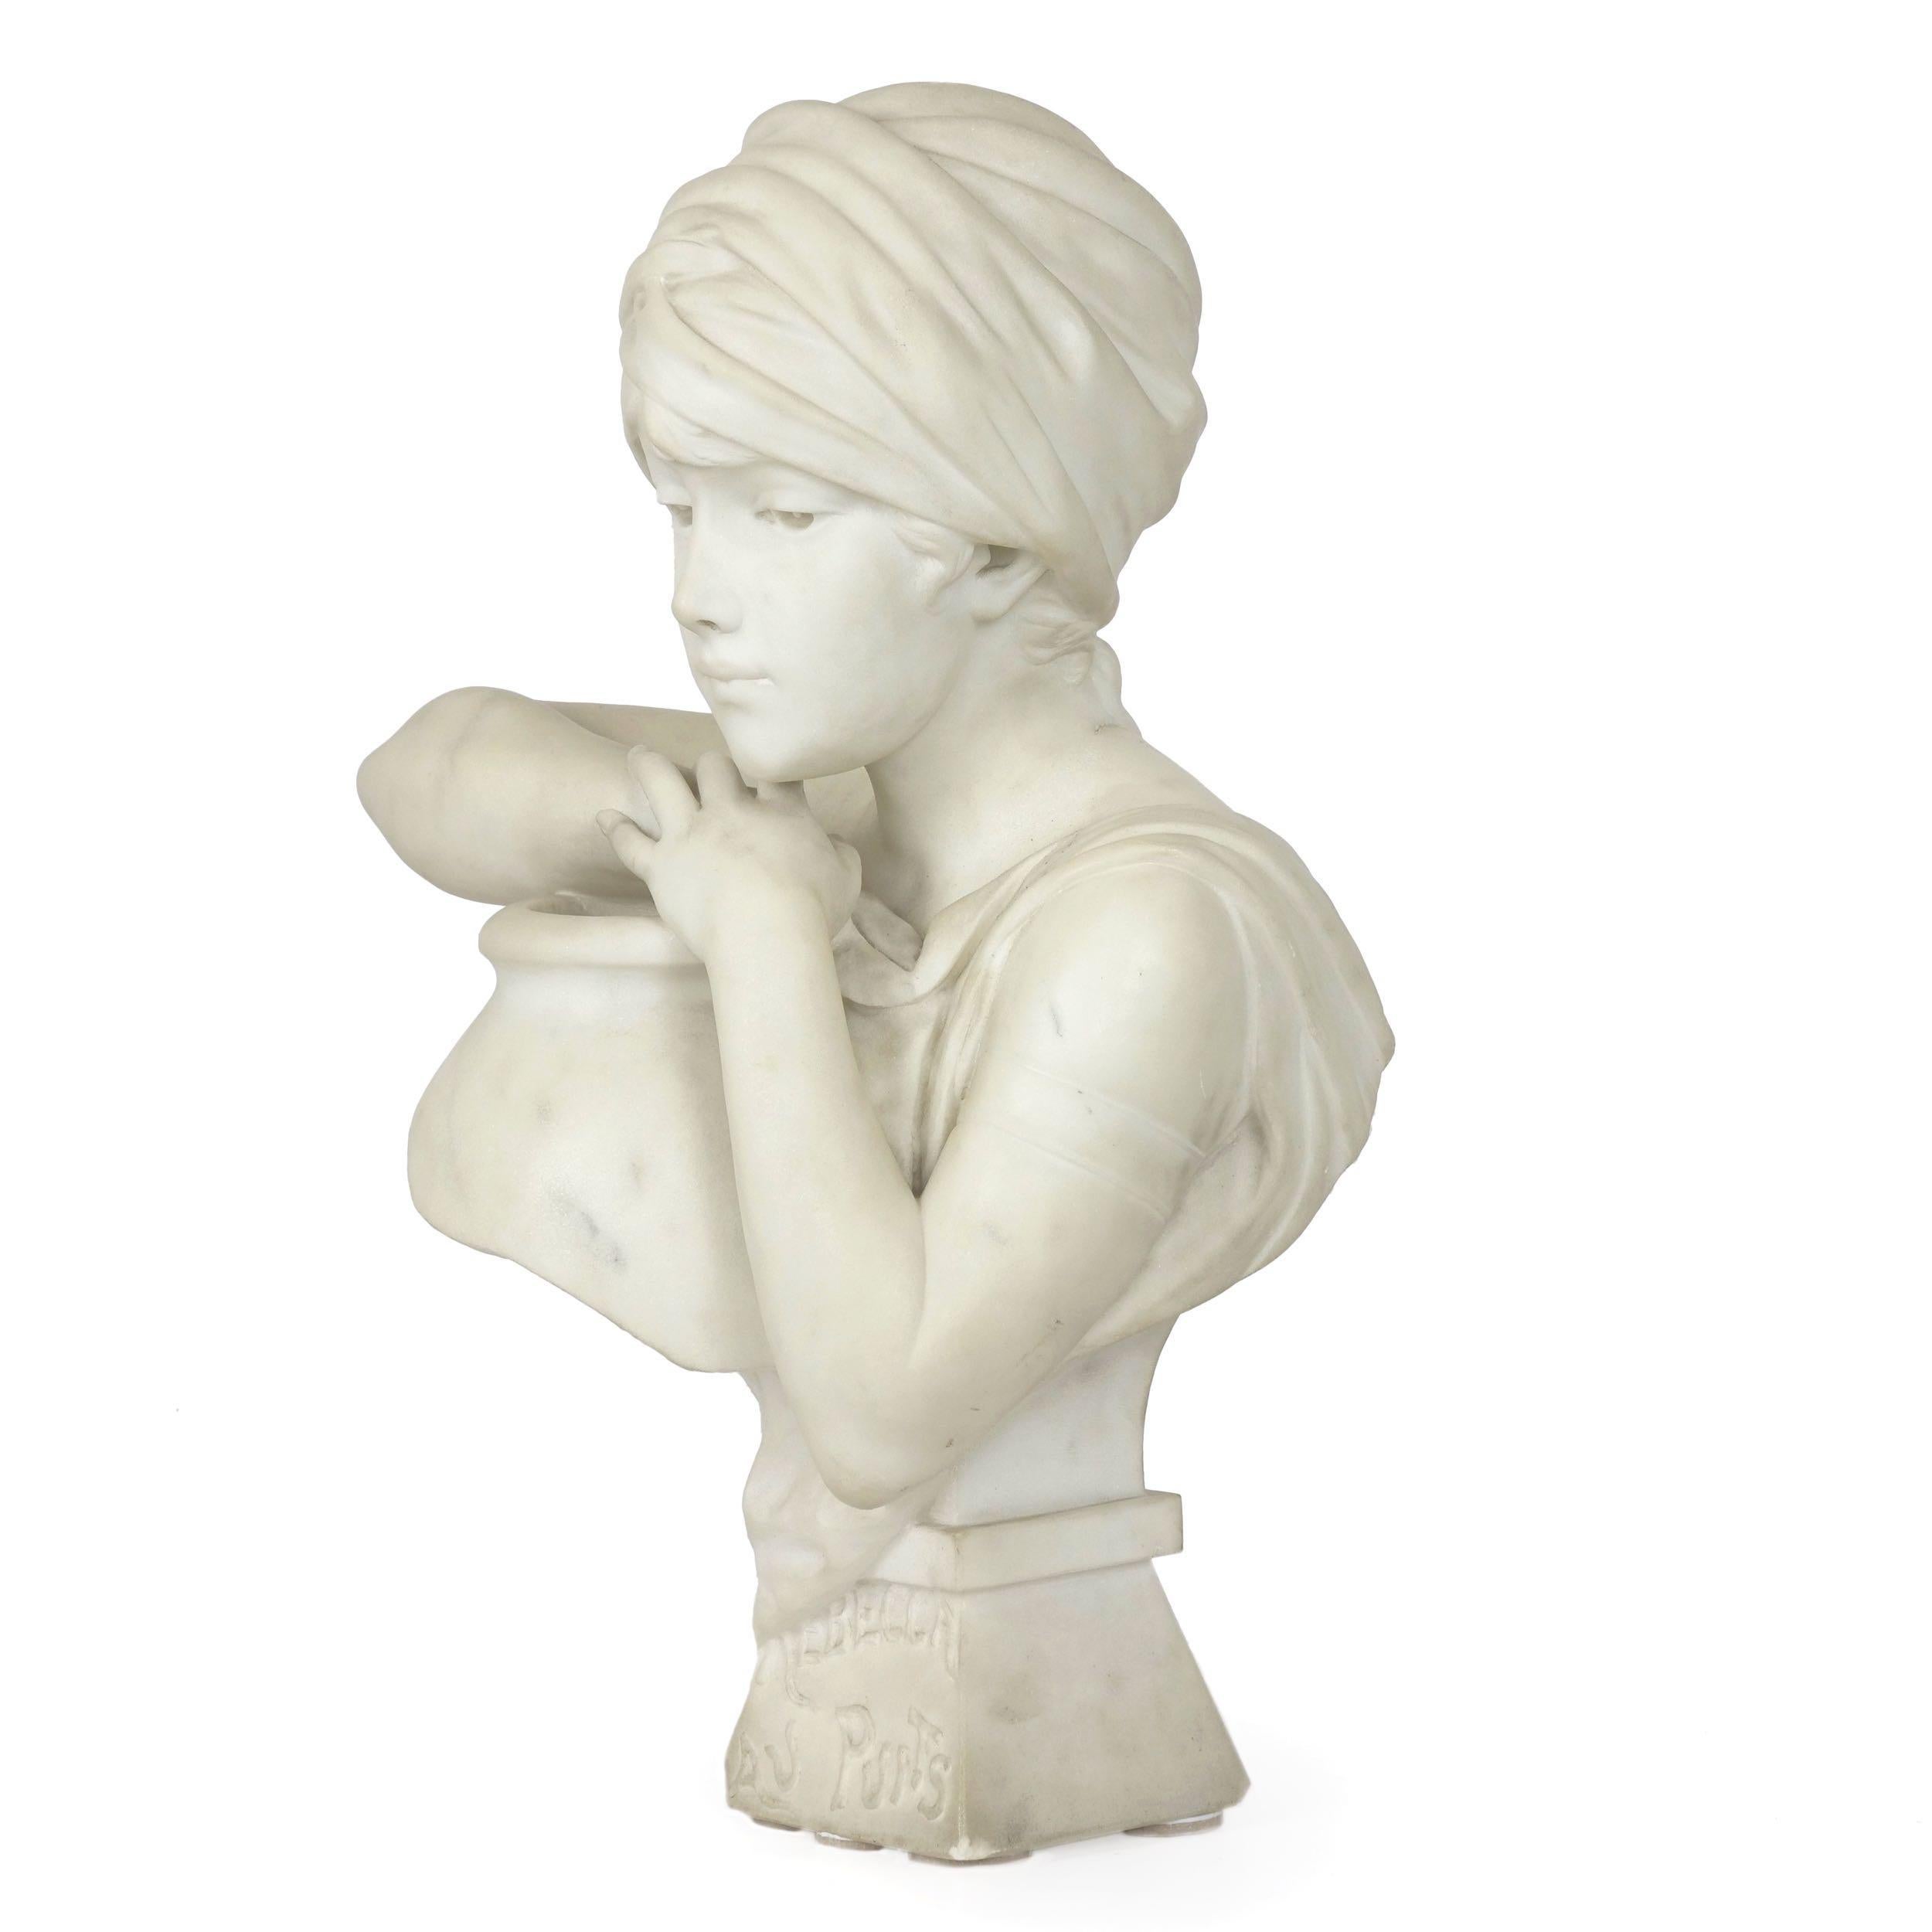 Art Nouveau “Rebecca at the Well” Italian Marble Antique Bust Sculpture by Antonio Piazza